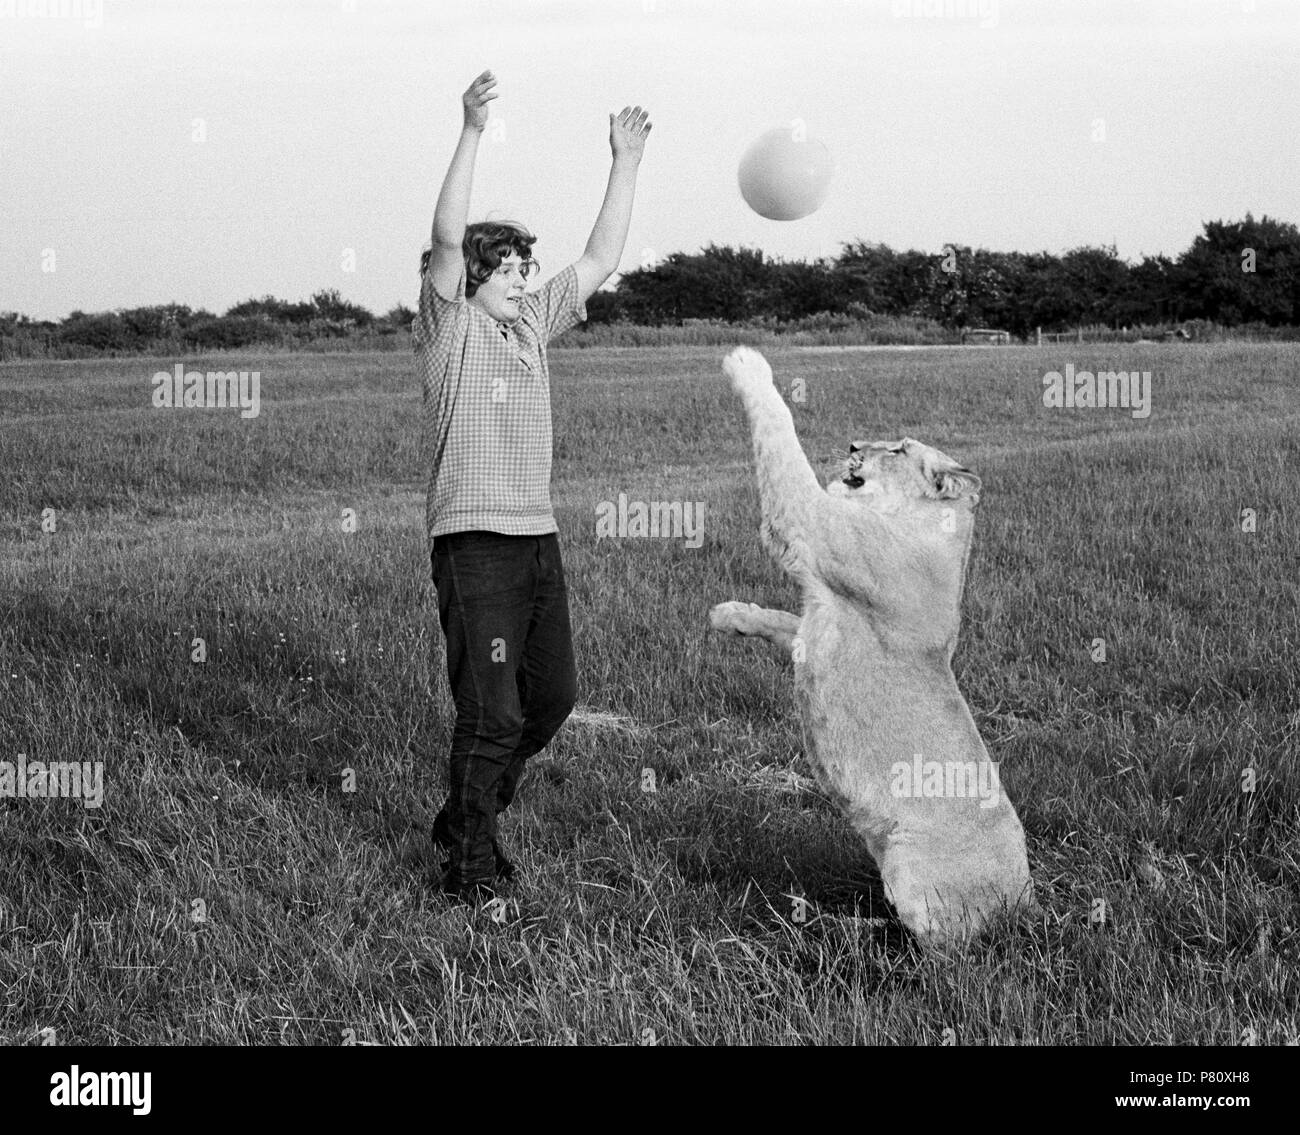 Boy playing ball with lions, England, Great Britain Stock Photo